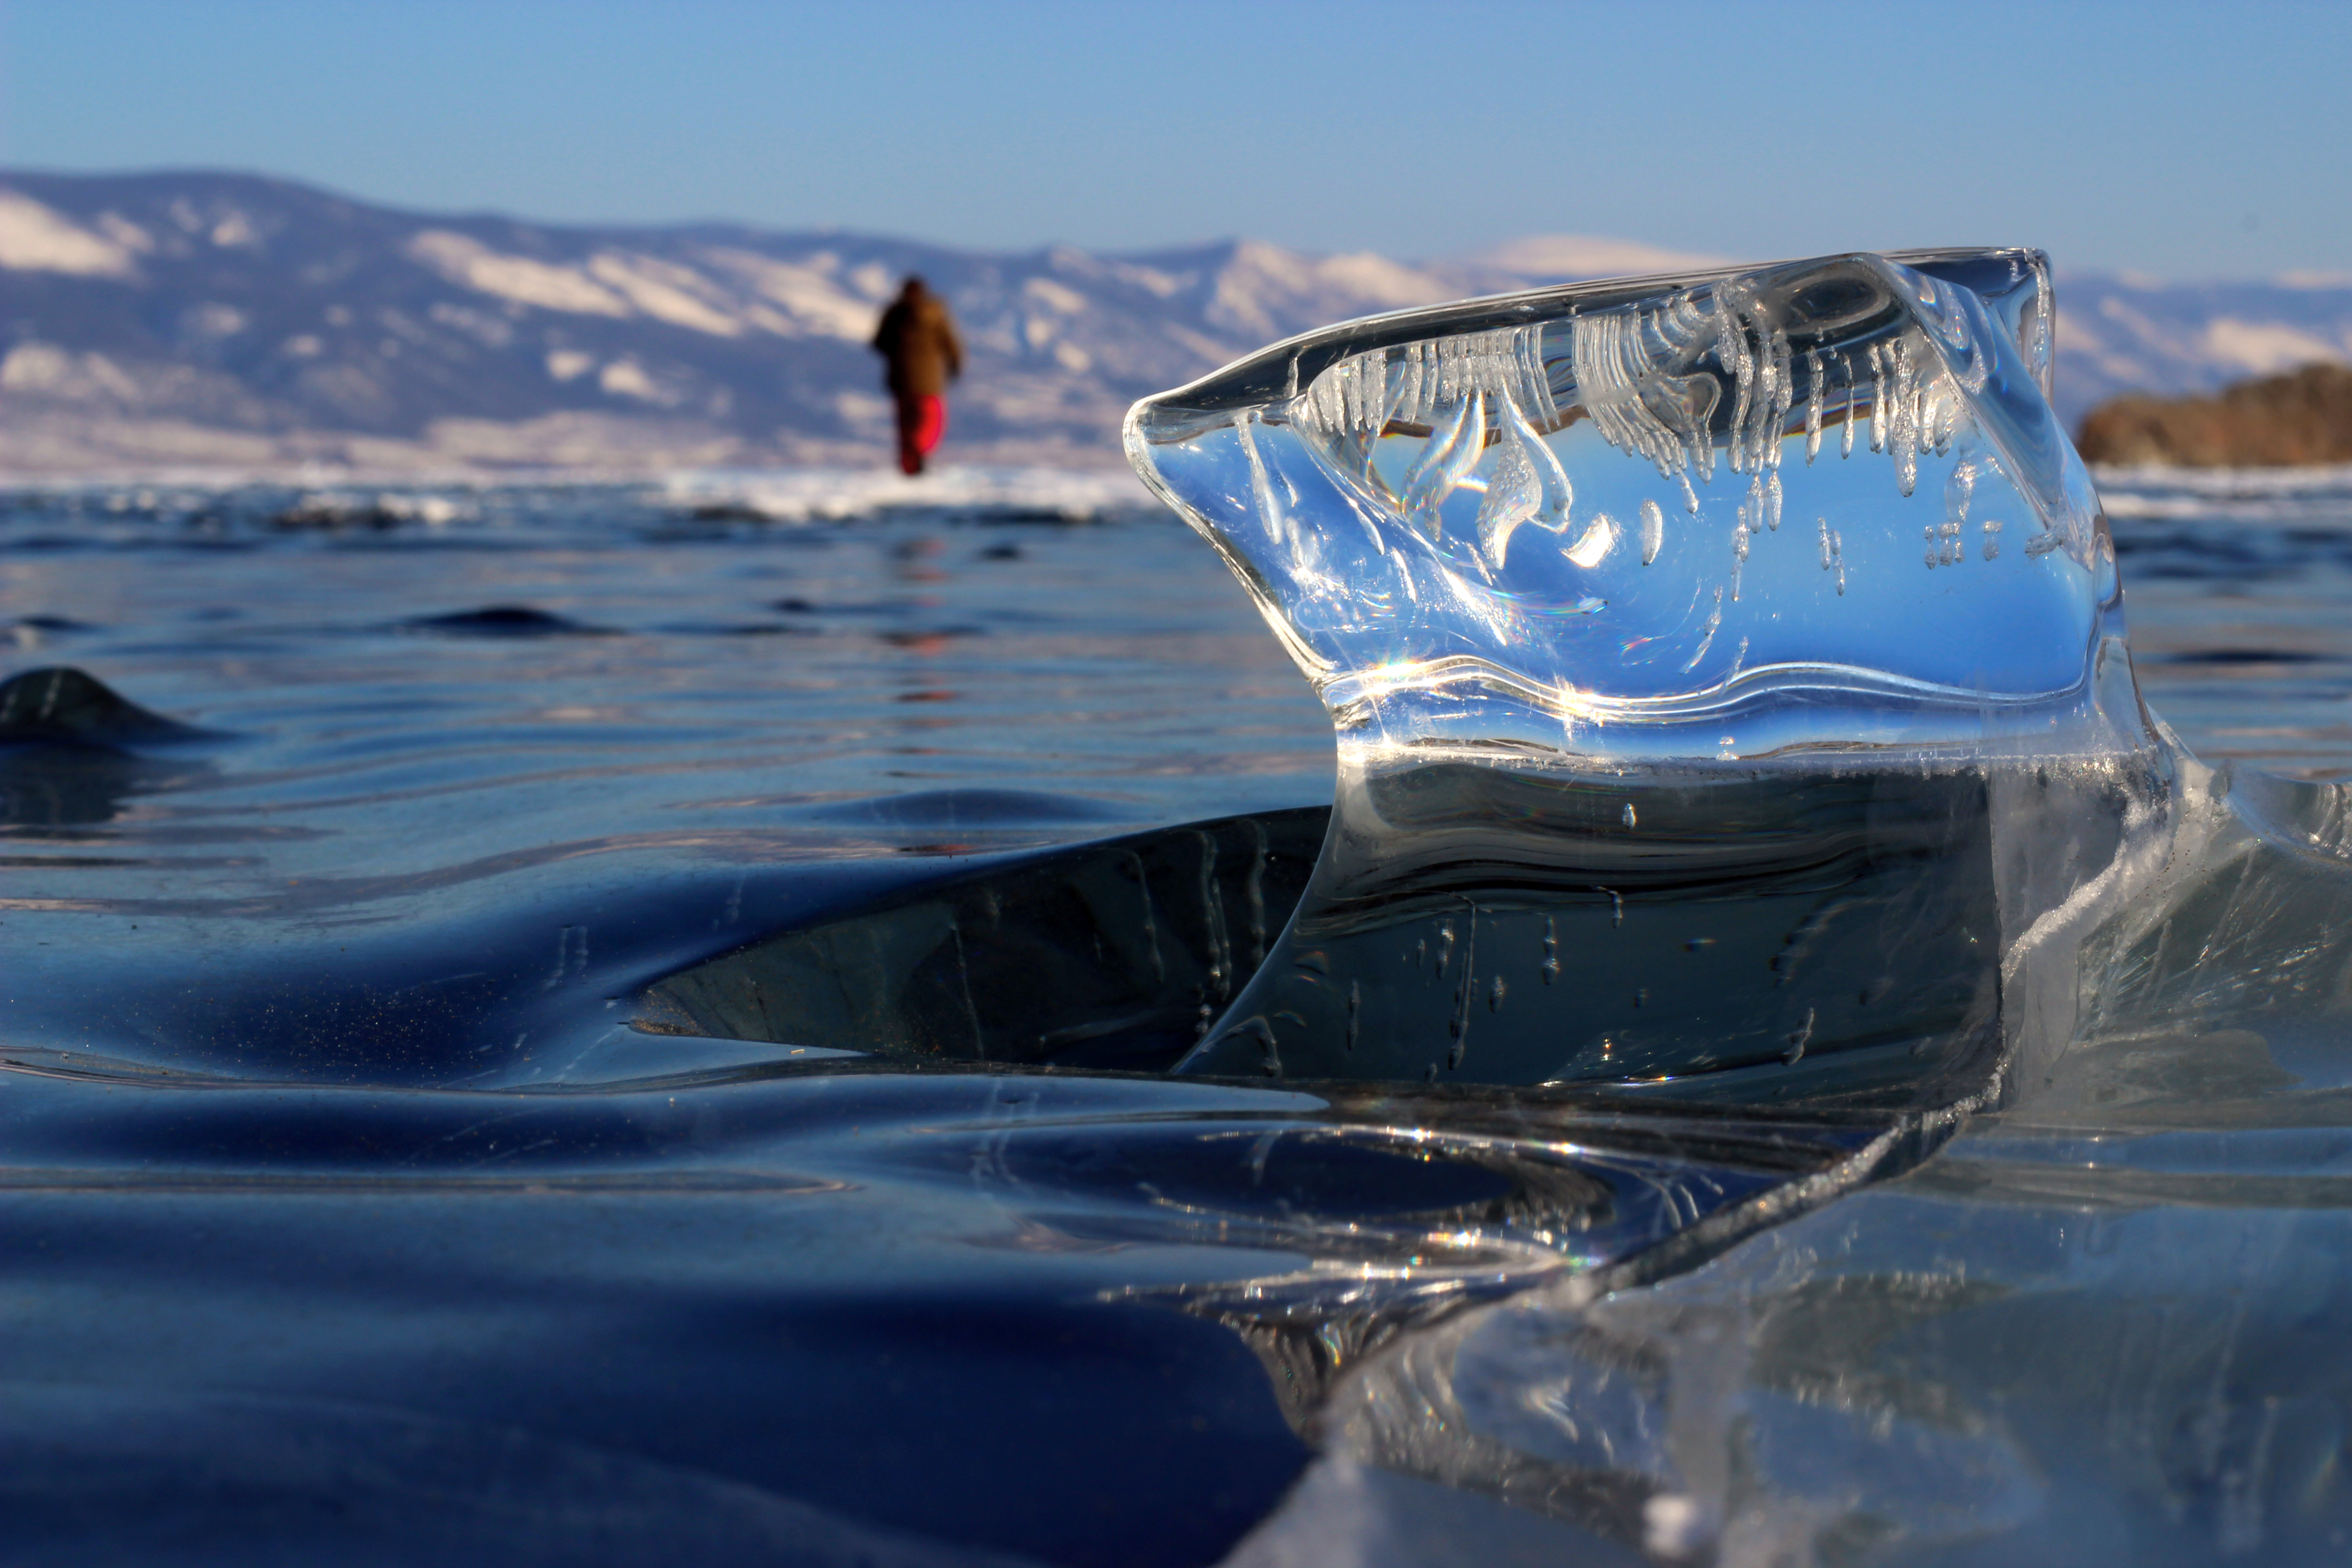 General 5184x3456 nature landscape winter snow ice Lake Baikal Siberia lake men Russia water mountains depth of field ice cubes